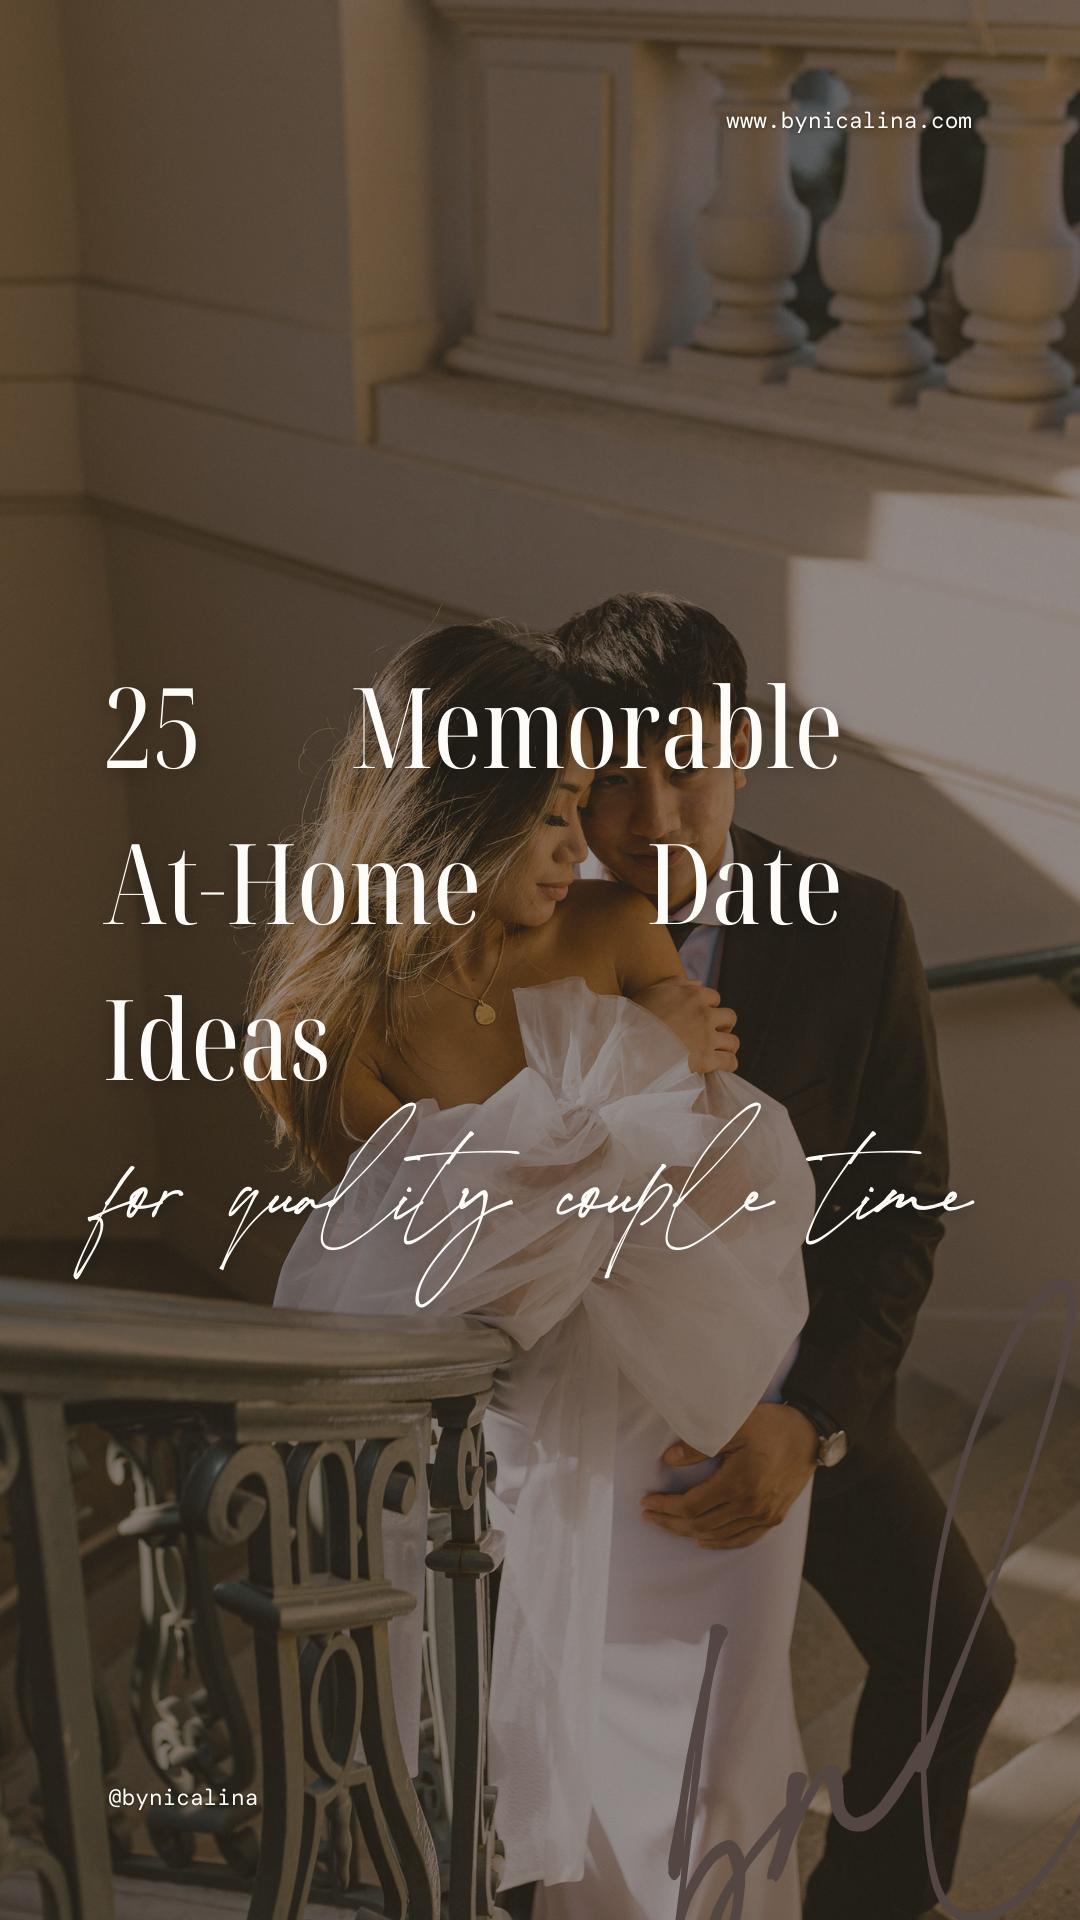 25 Quality Time Date Ideas At Home